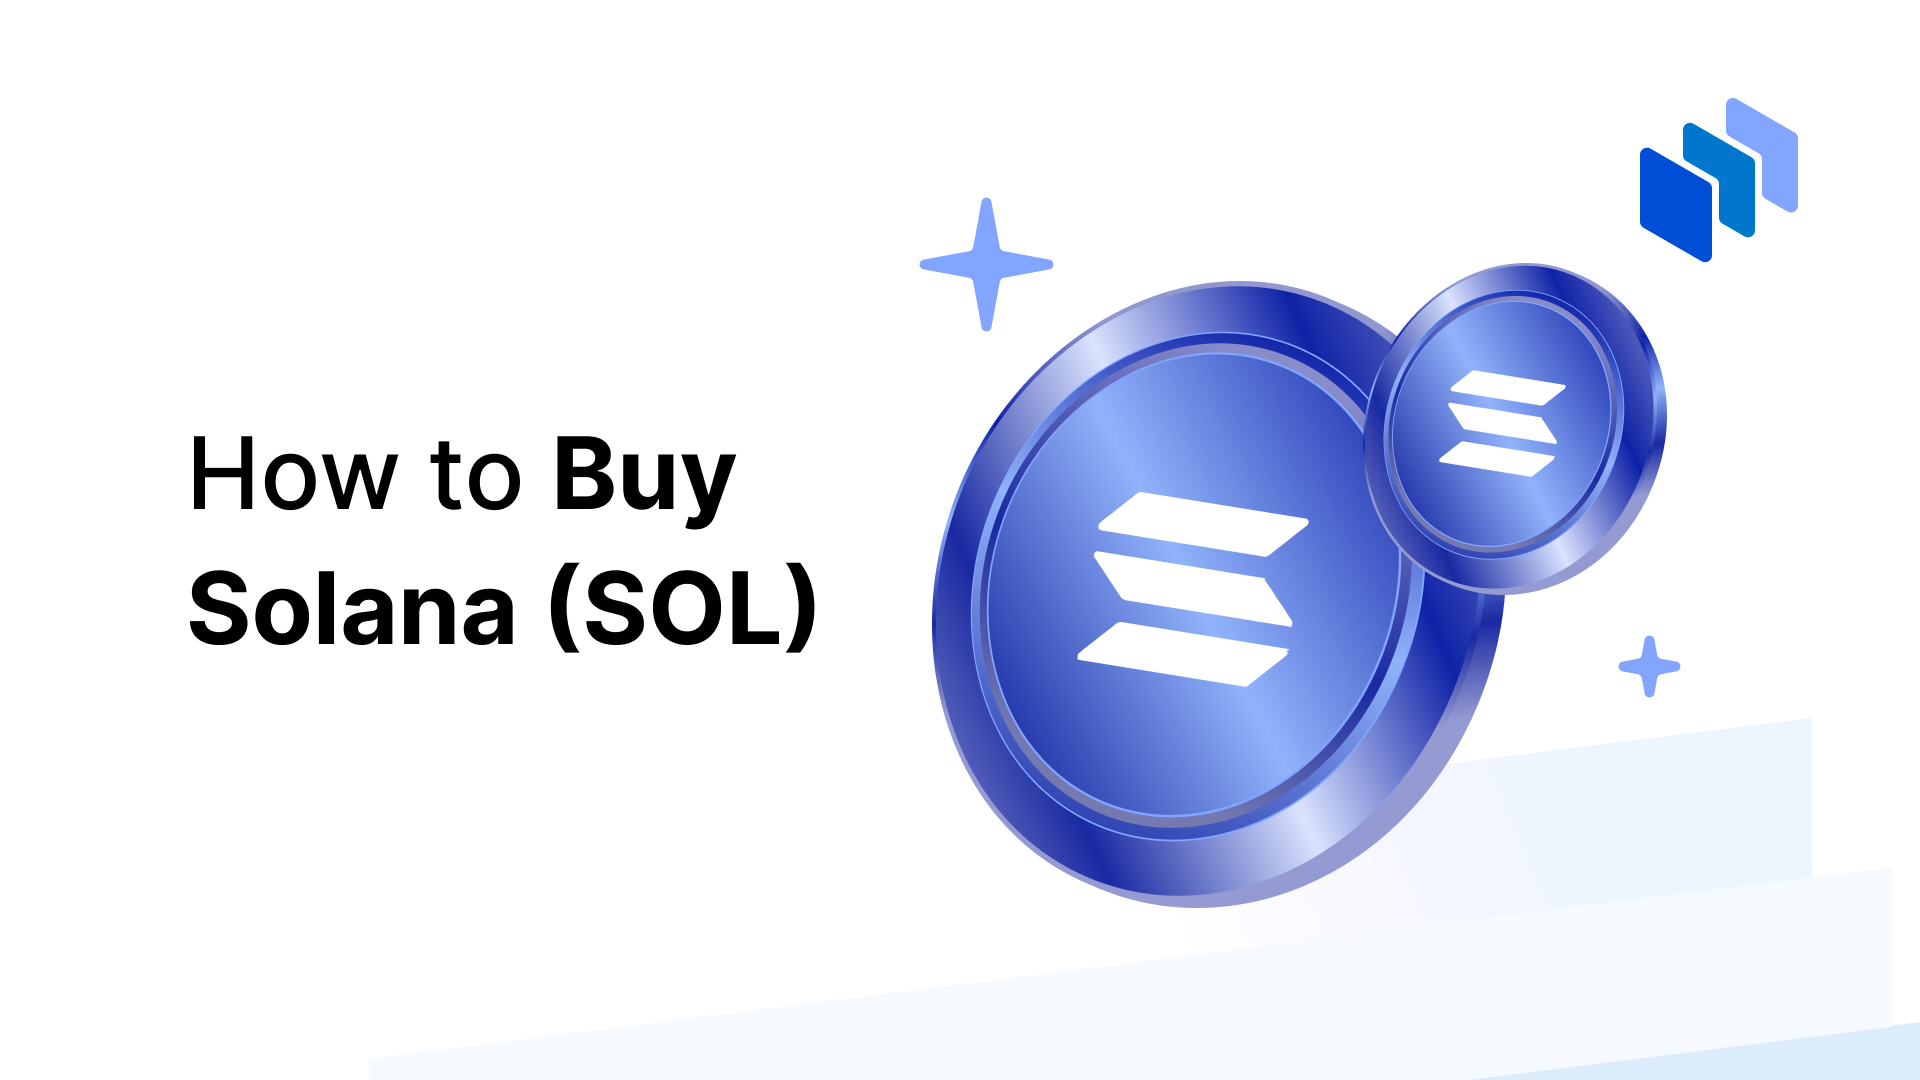 How to Buy Solana (SOL)